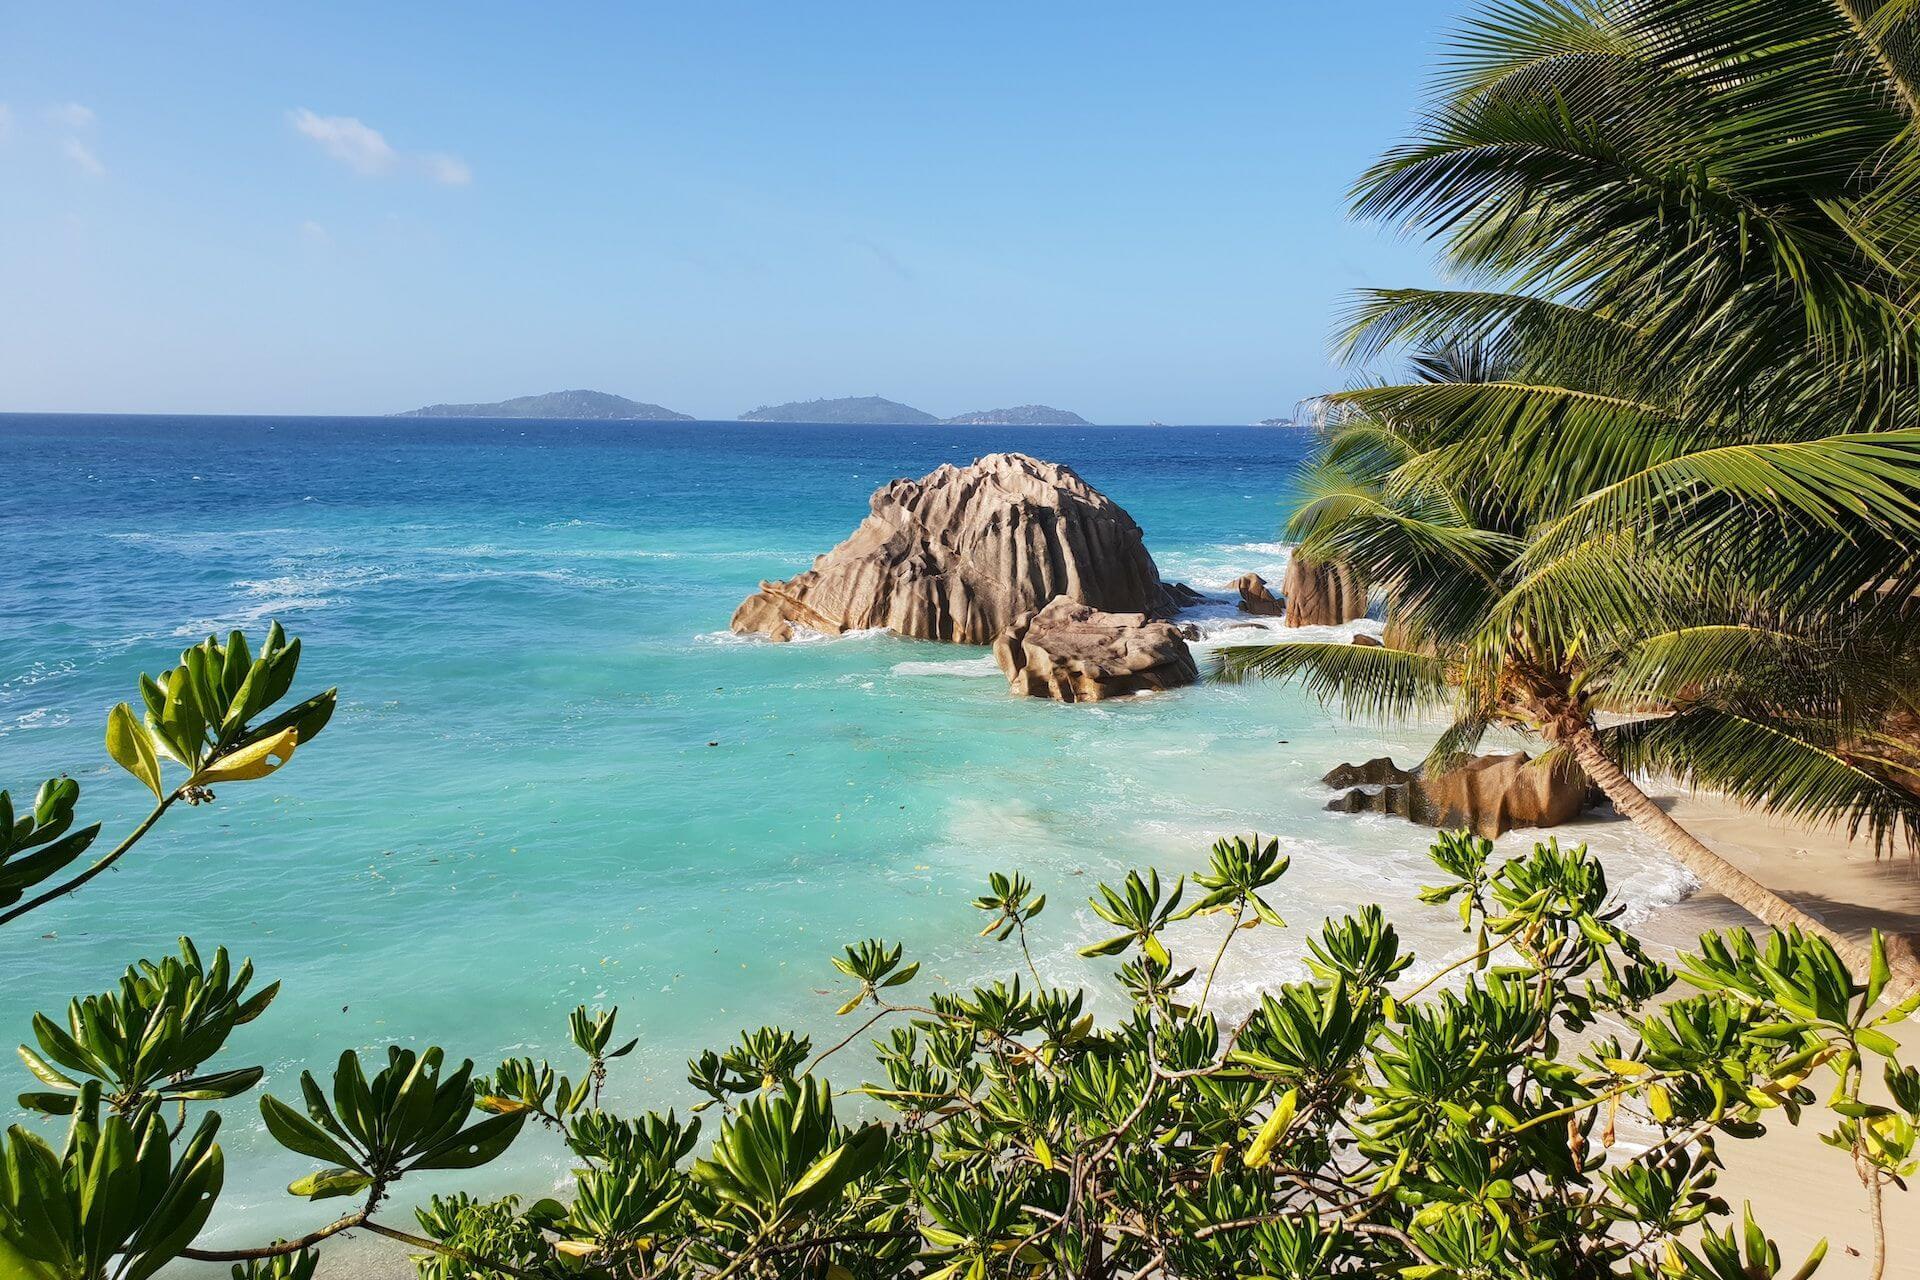 View of a beach, sea and palms in Seychelles